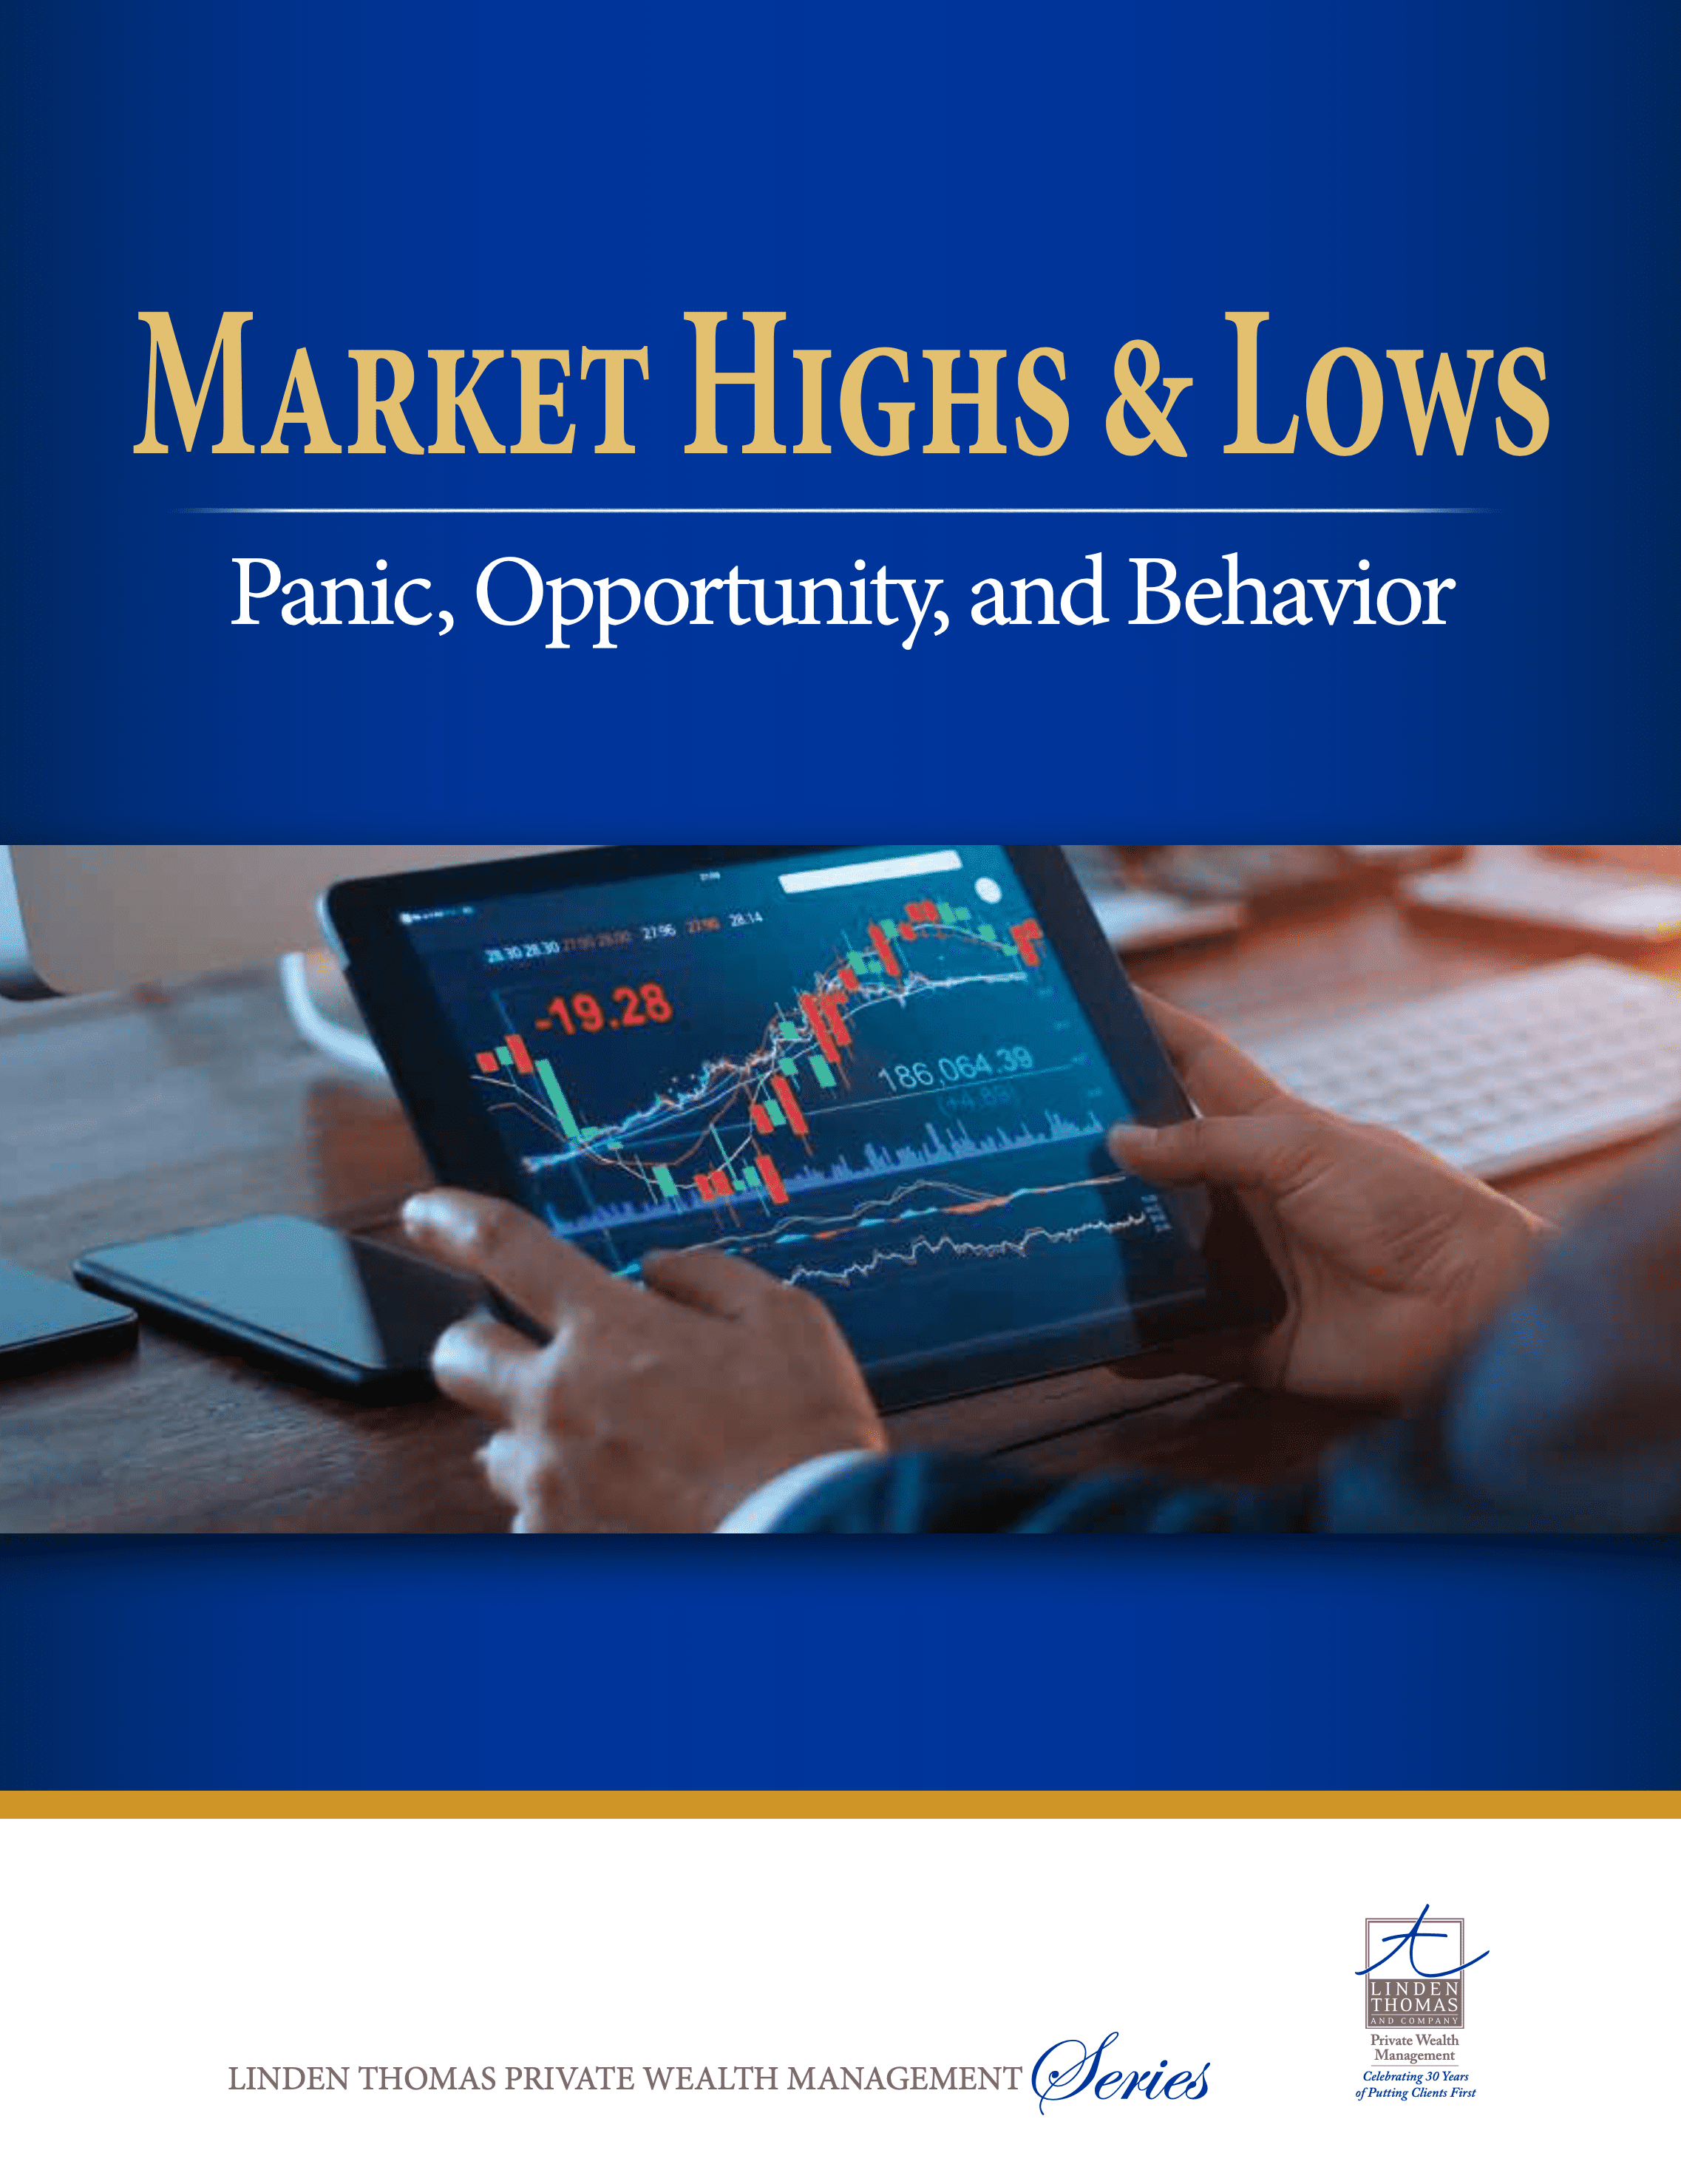 Market Highs & Lows Panic Opportunity and Behavior